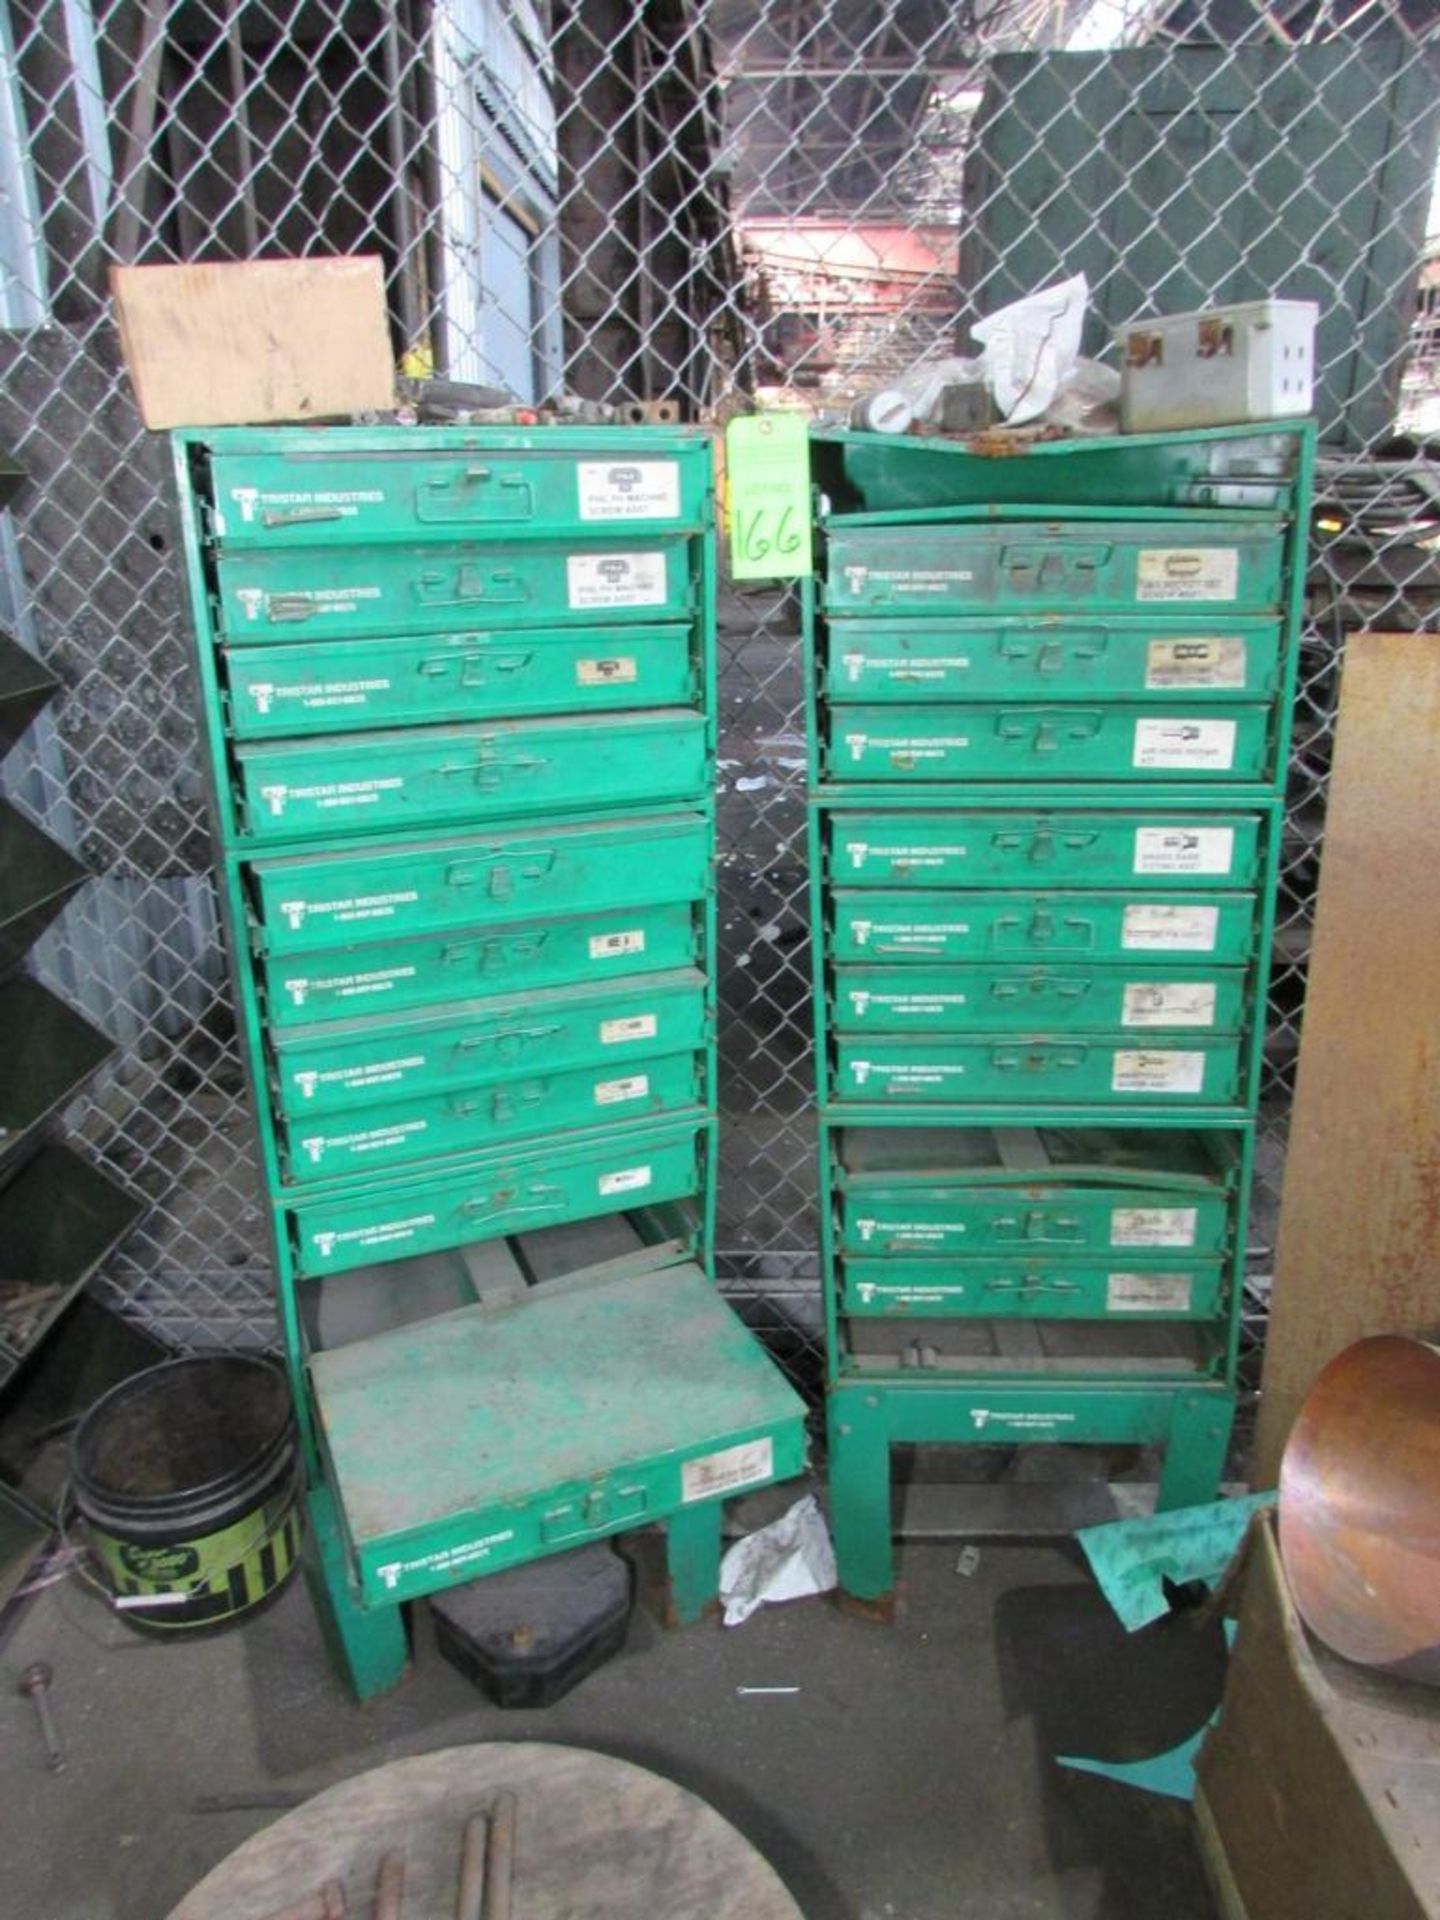 (6) Tristar IND Hardware Organizers with Assorted Hardware and Fittings